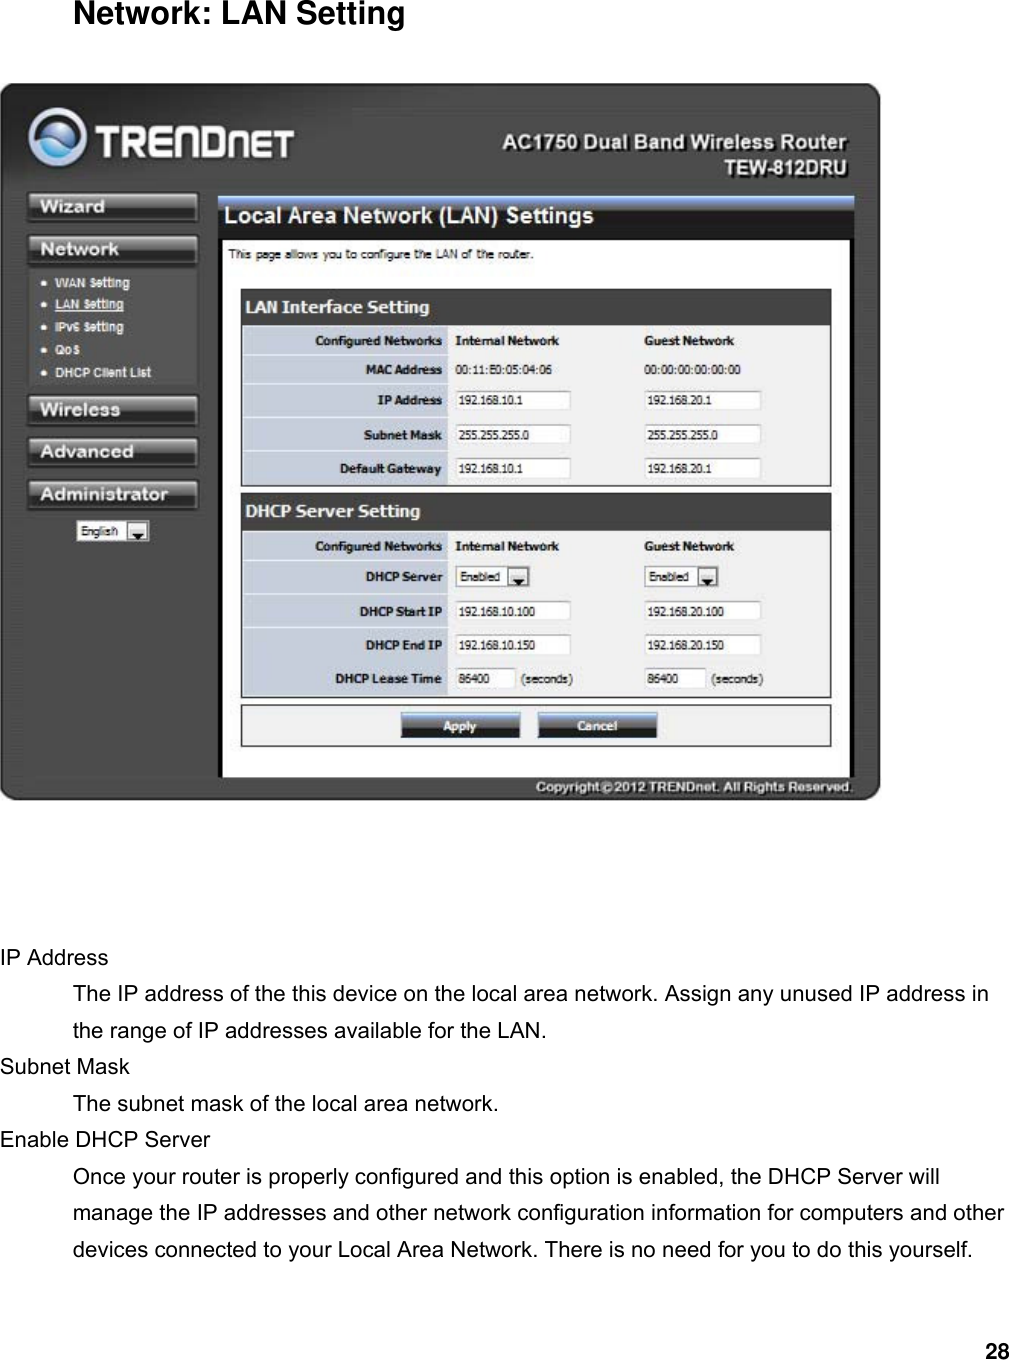 28 Network: LAN Setting     IP Address   The IP address of the this device on the local area network. Assign any unused IP address in the range of IP addresses available for the LAN.   Subnet Mask   The subnet mask of the local area network.   Enable DHCP Server   Once your router is properly configured and this option is enabled, the DHCP Server will manage the IP addresses and other network configuration information for computers and other devices connected to your Local Area Network. There is no need for you to do this yourself.   